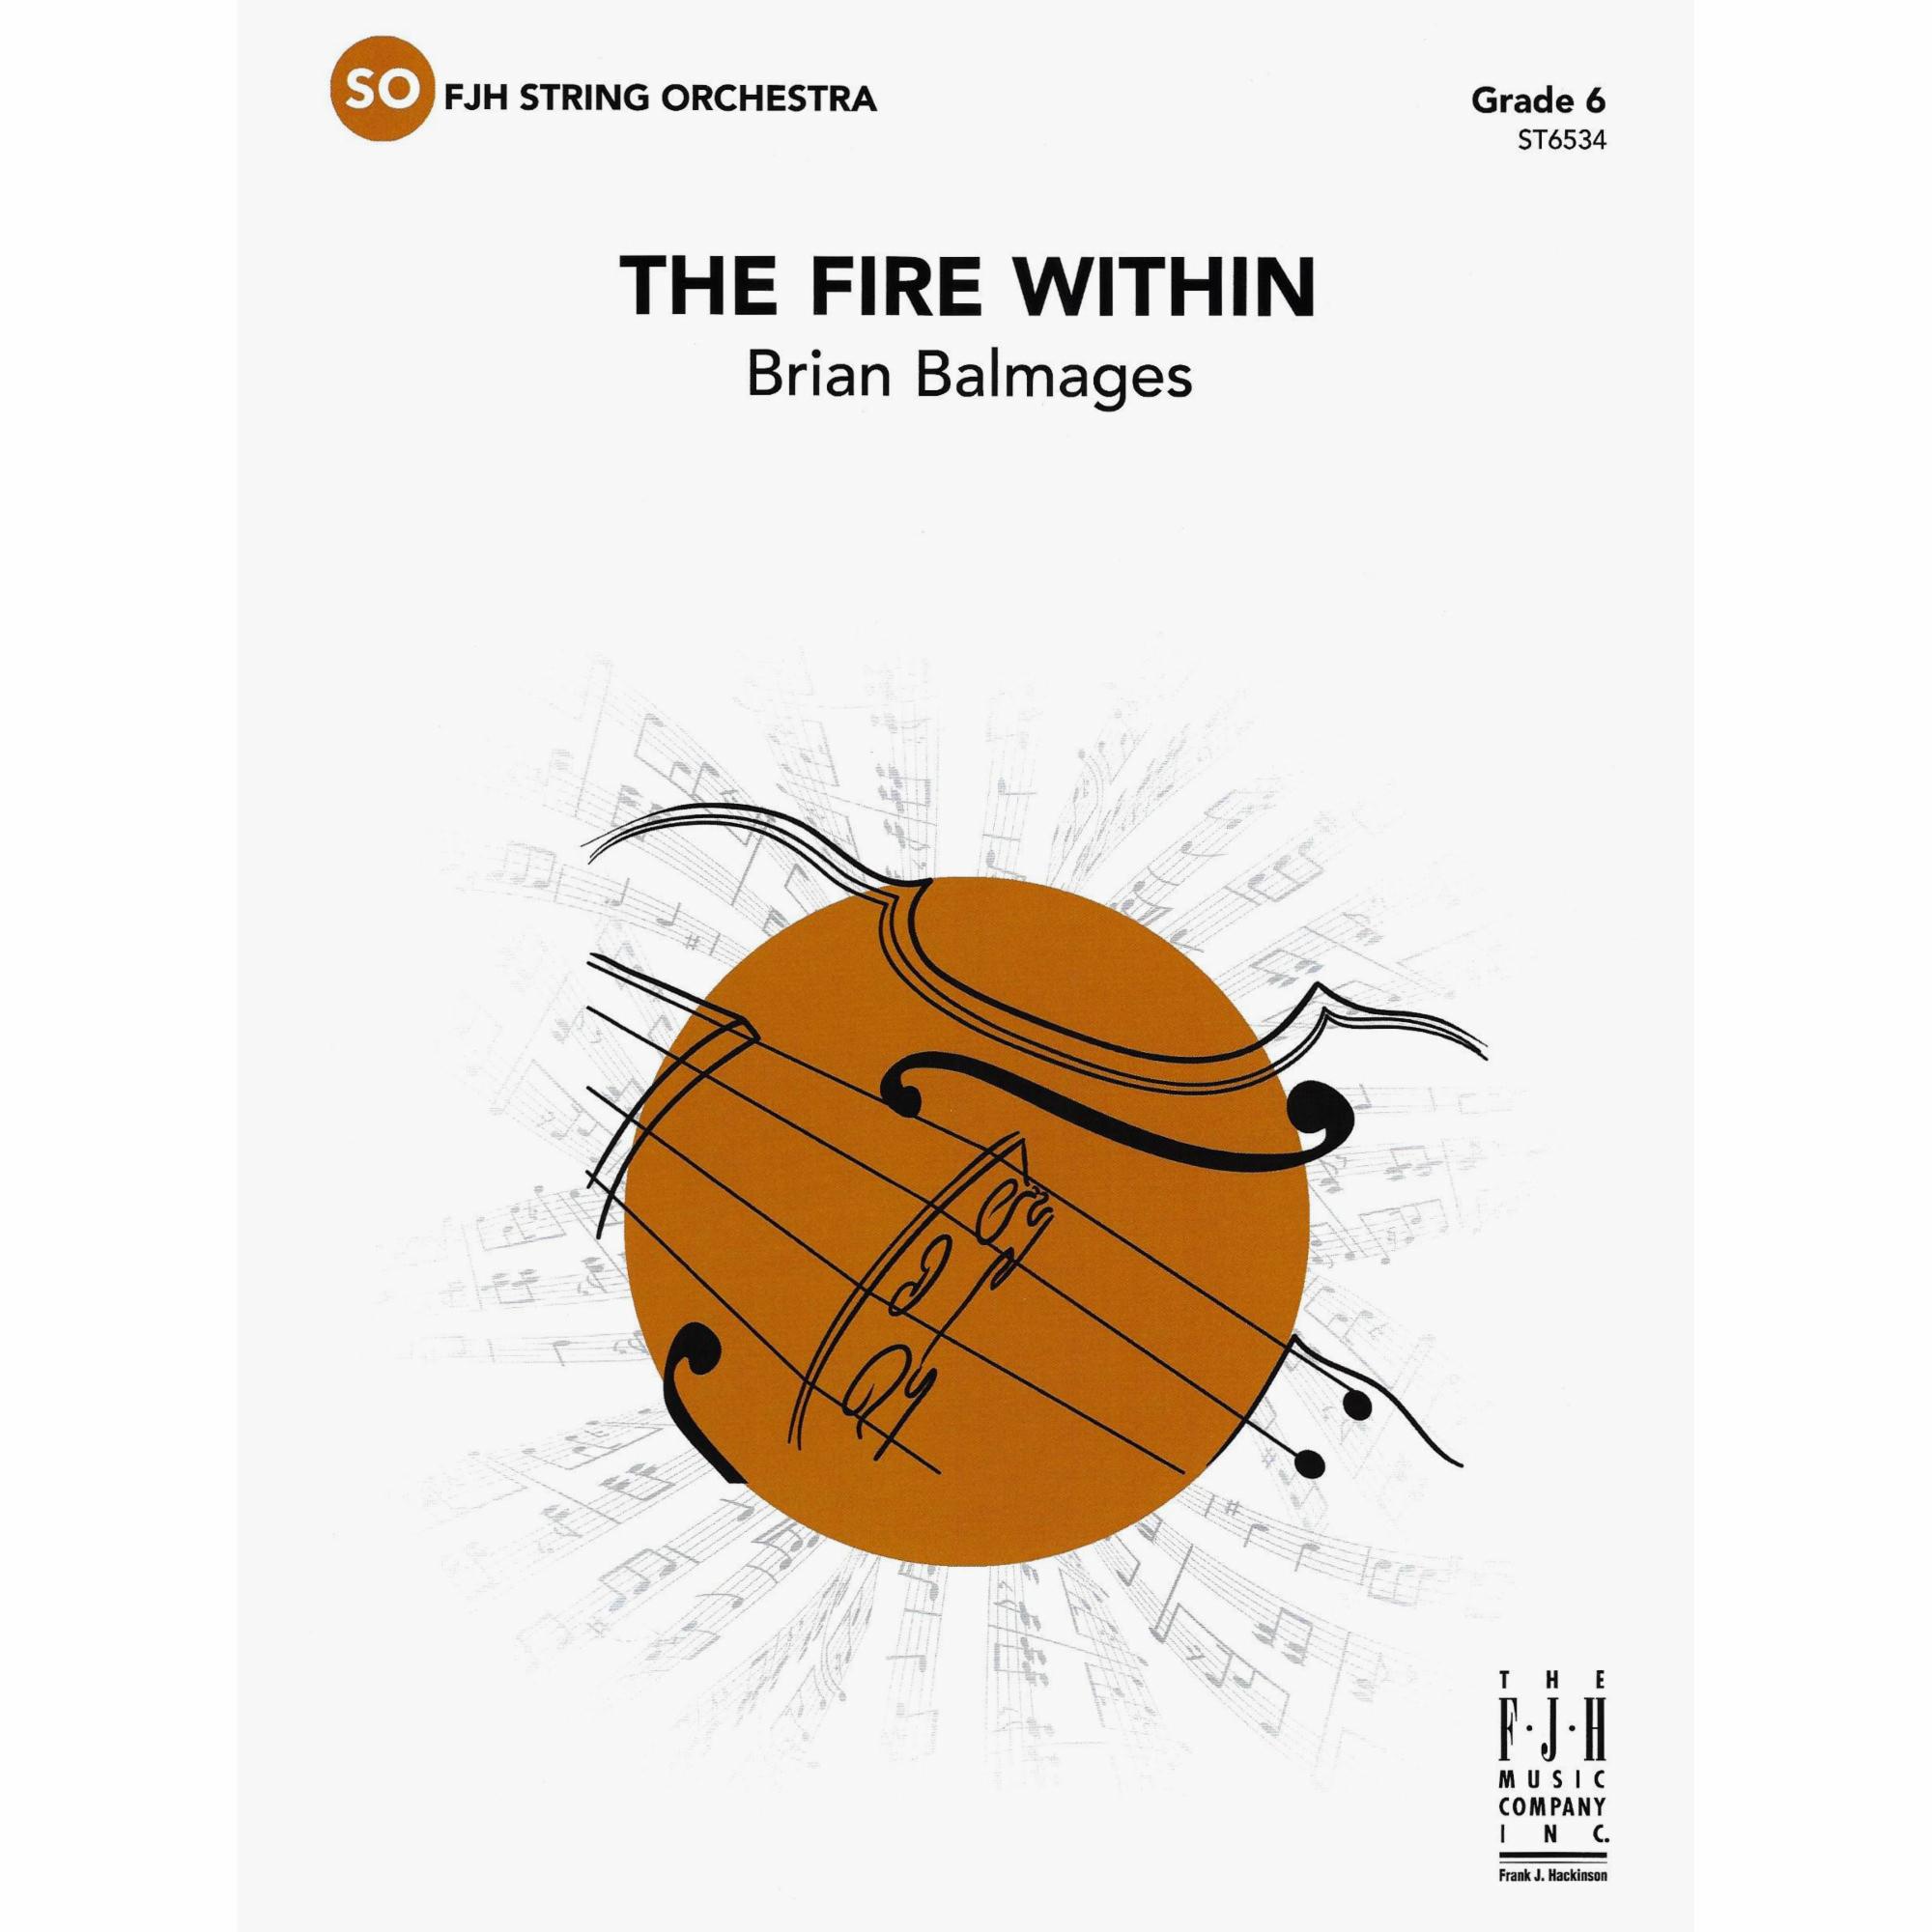 The Fire Within for String Orchestra